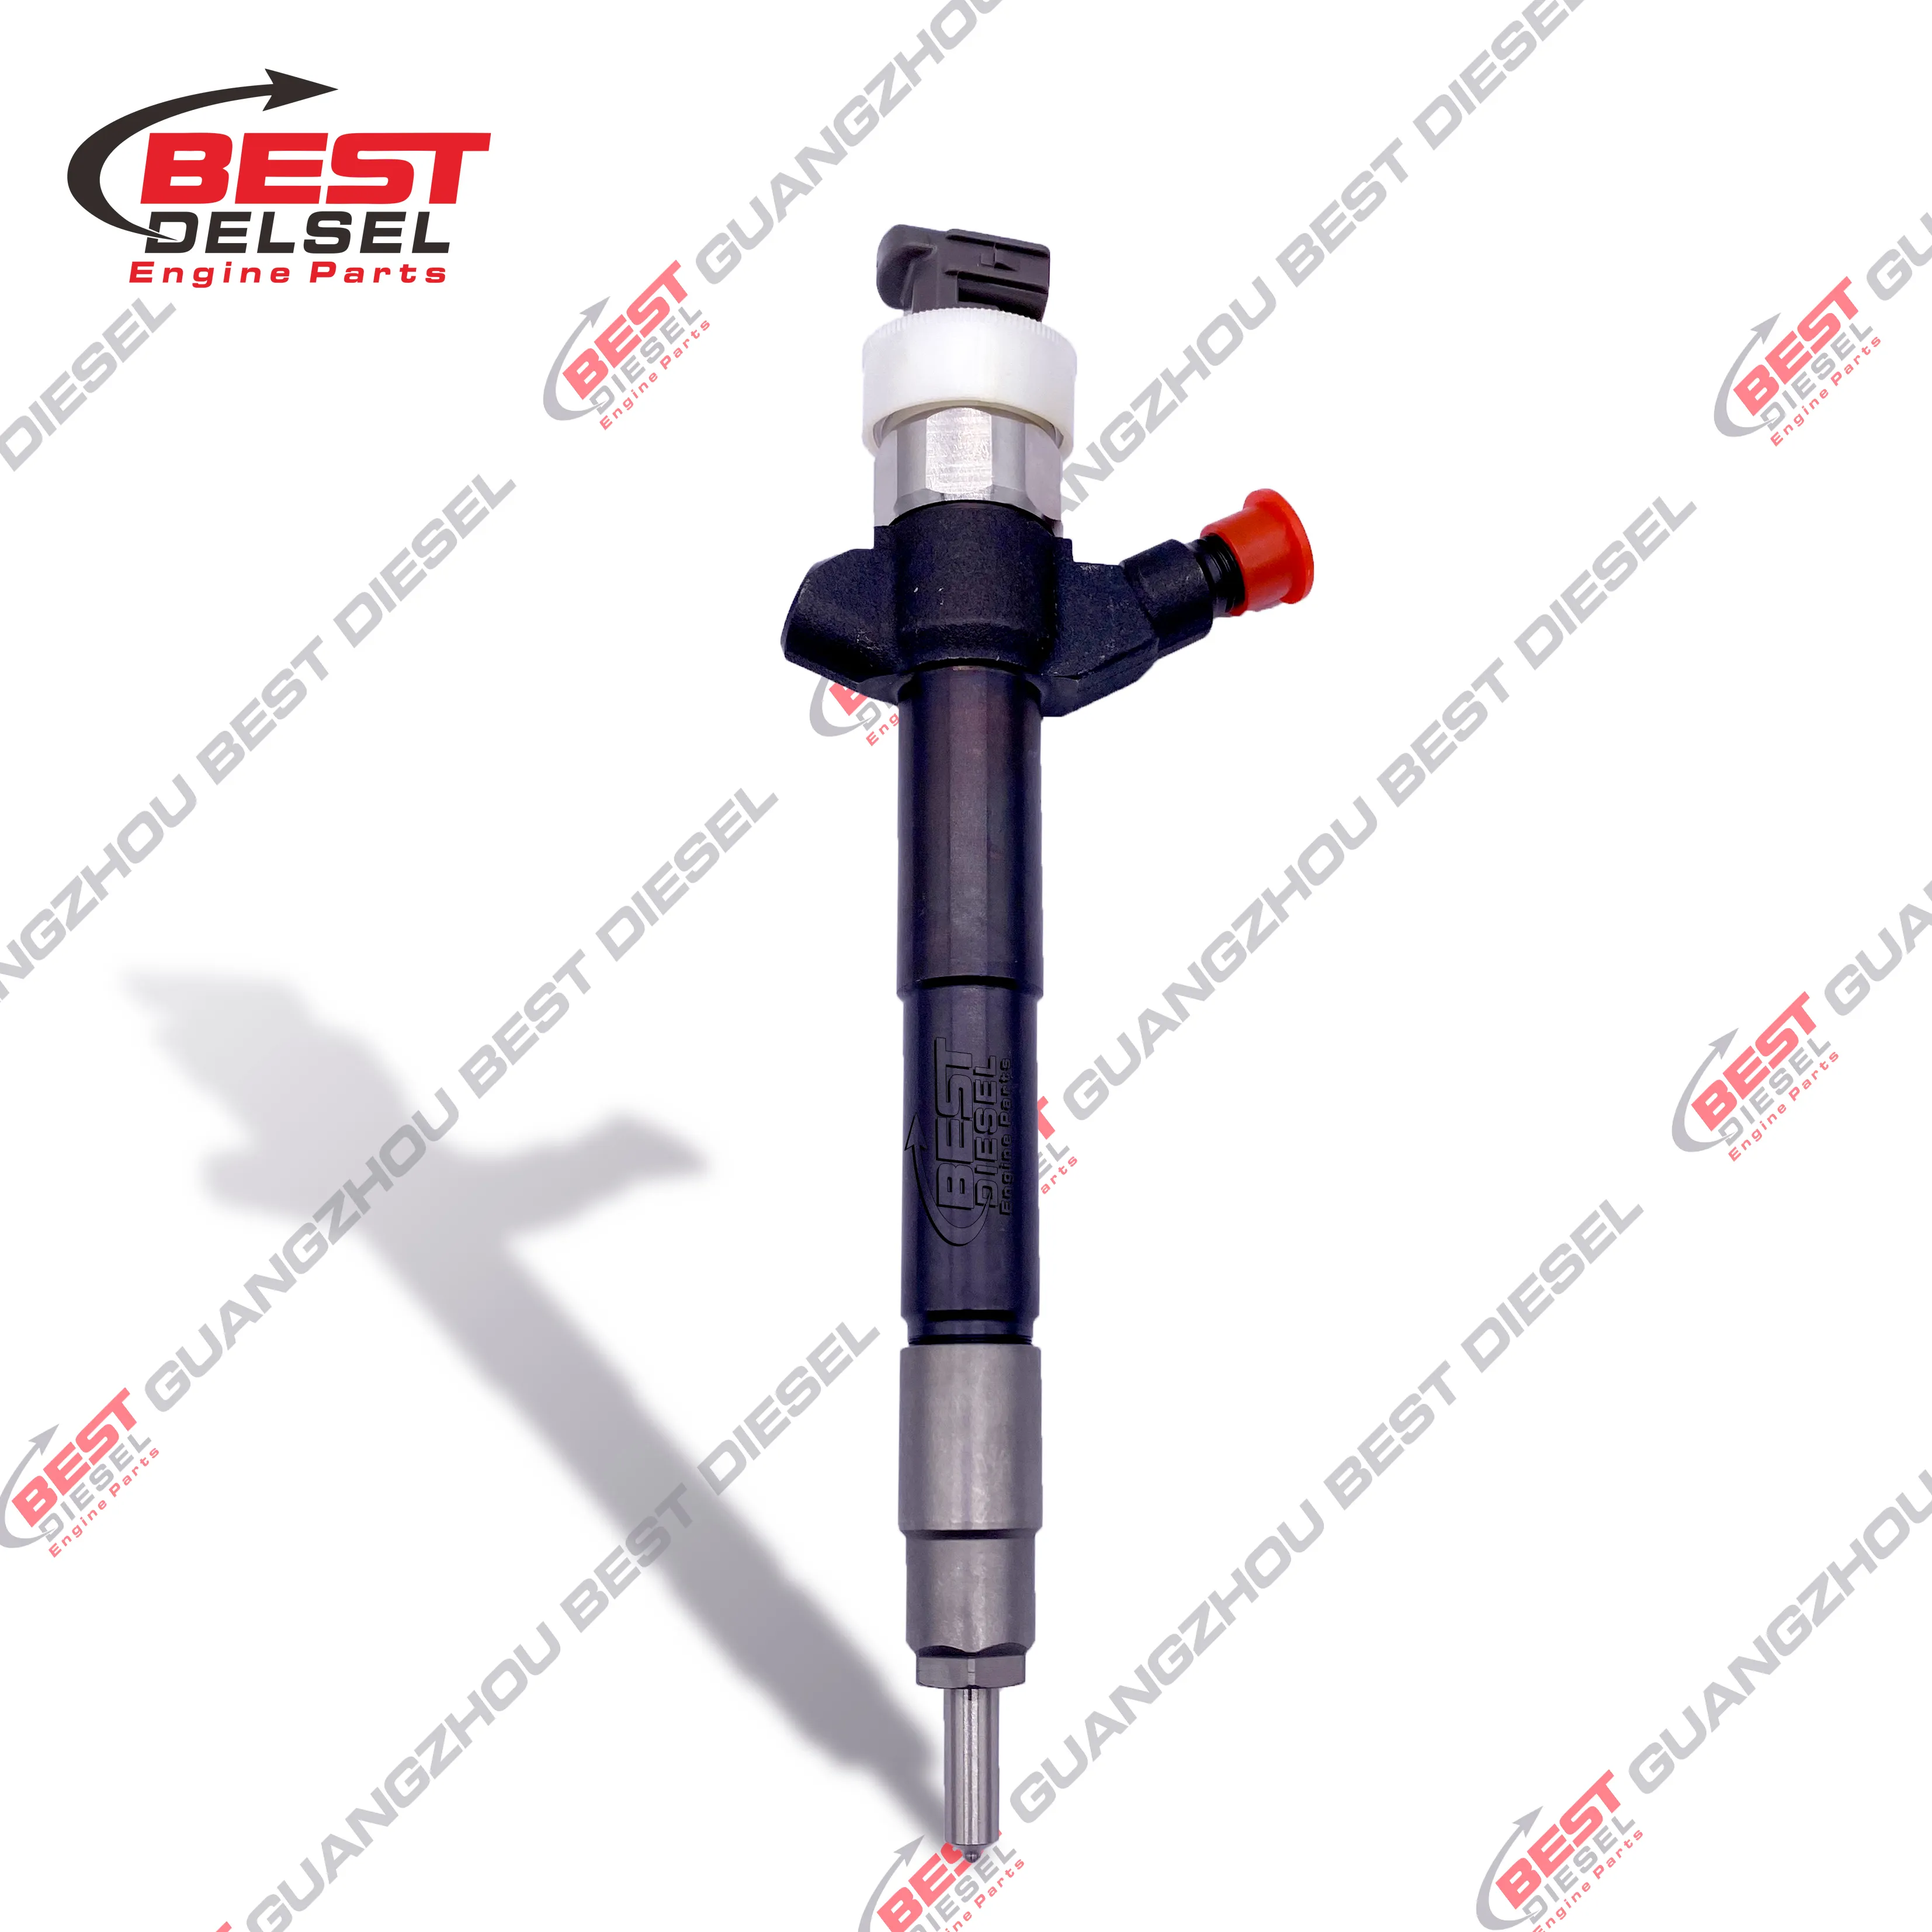 New Diesel Fuel Injector 095000-8530 23670-30300 095000-7390 095000-776 095000-7750 0950008530 23670-0L010 For Hilux 2KD-FTV